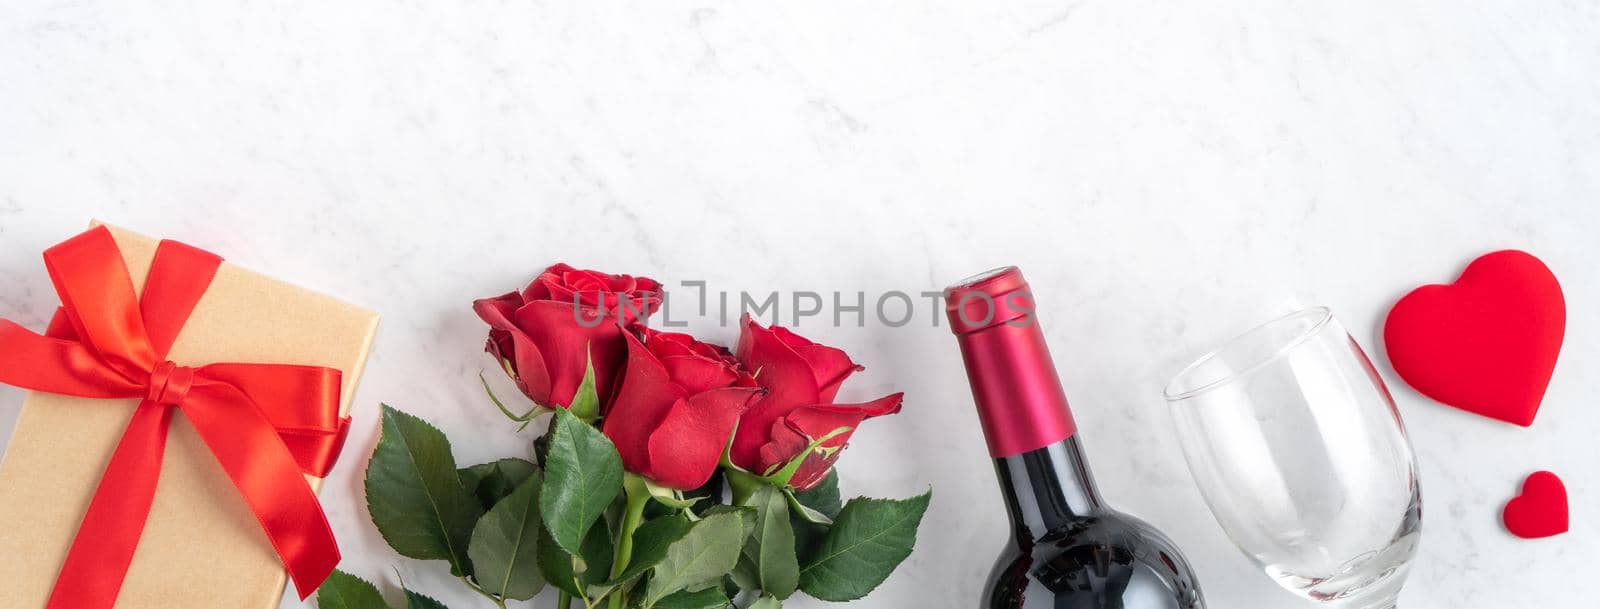 Top view of Valentine day gift with rose and wine, festive design concept for special holiday dating meal.